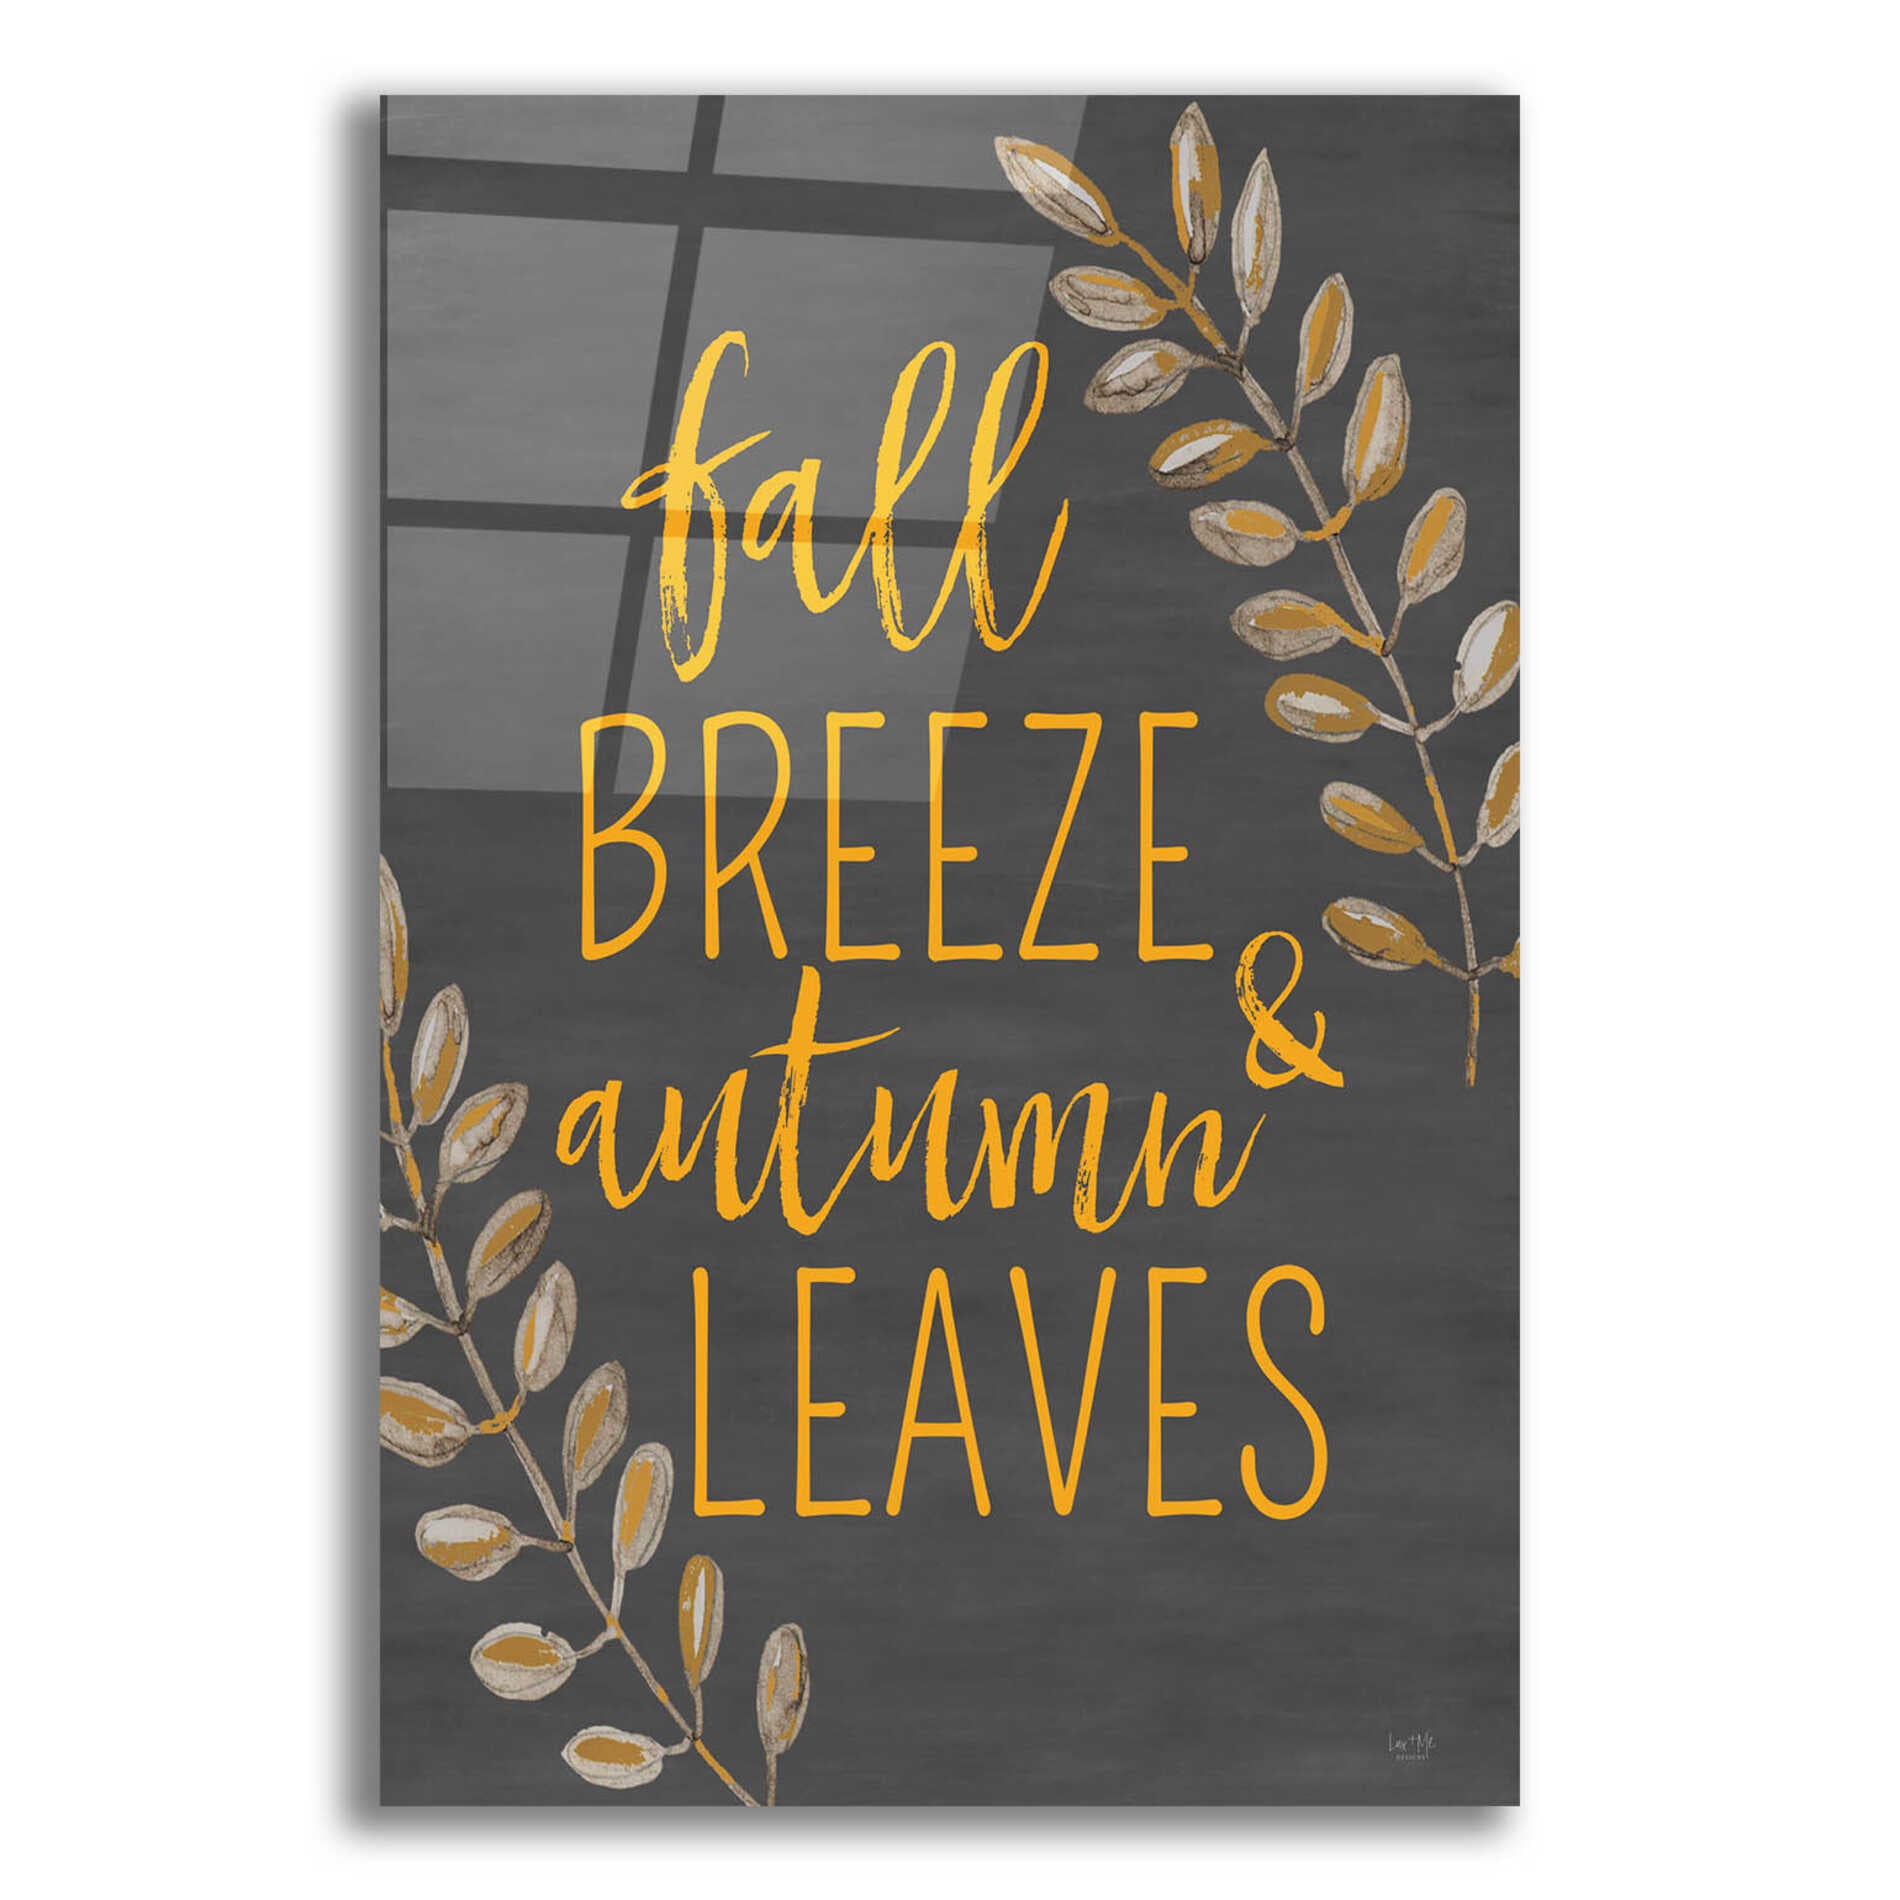 Epic Art 'Fall Breeze & Autumn Leaves' by Lux + Me Designs, Acrylic Glass Wall Art,12x16